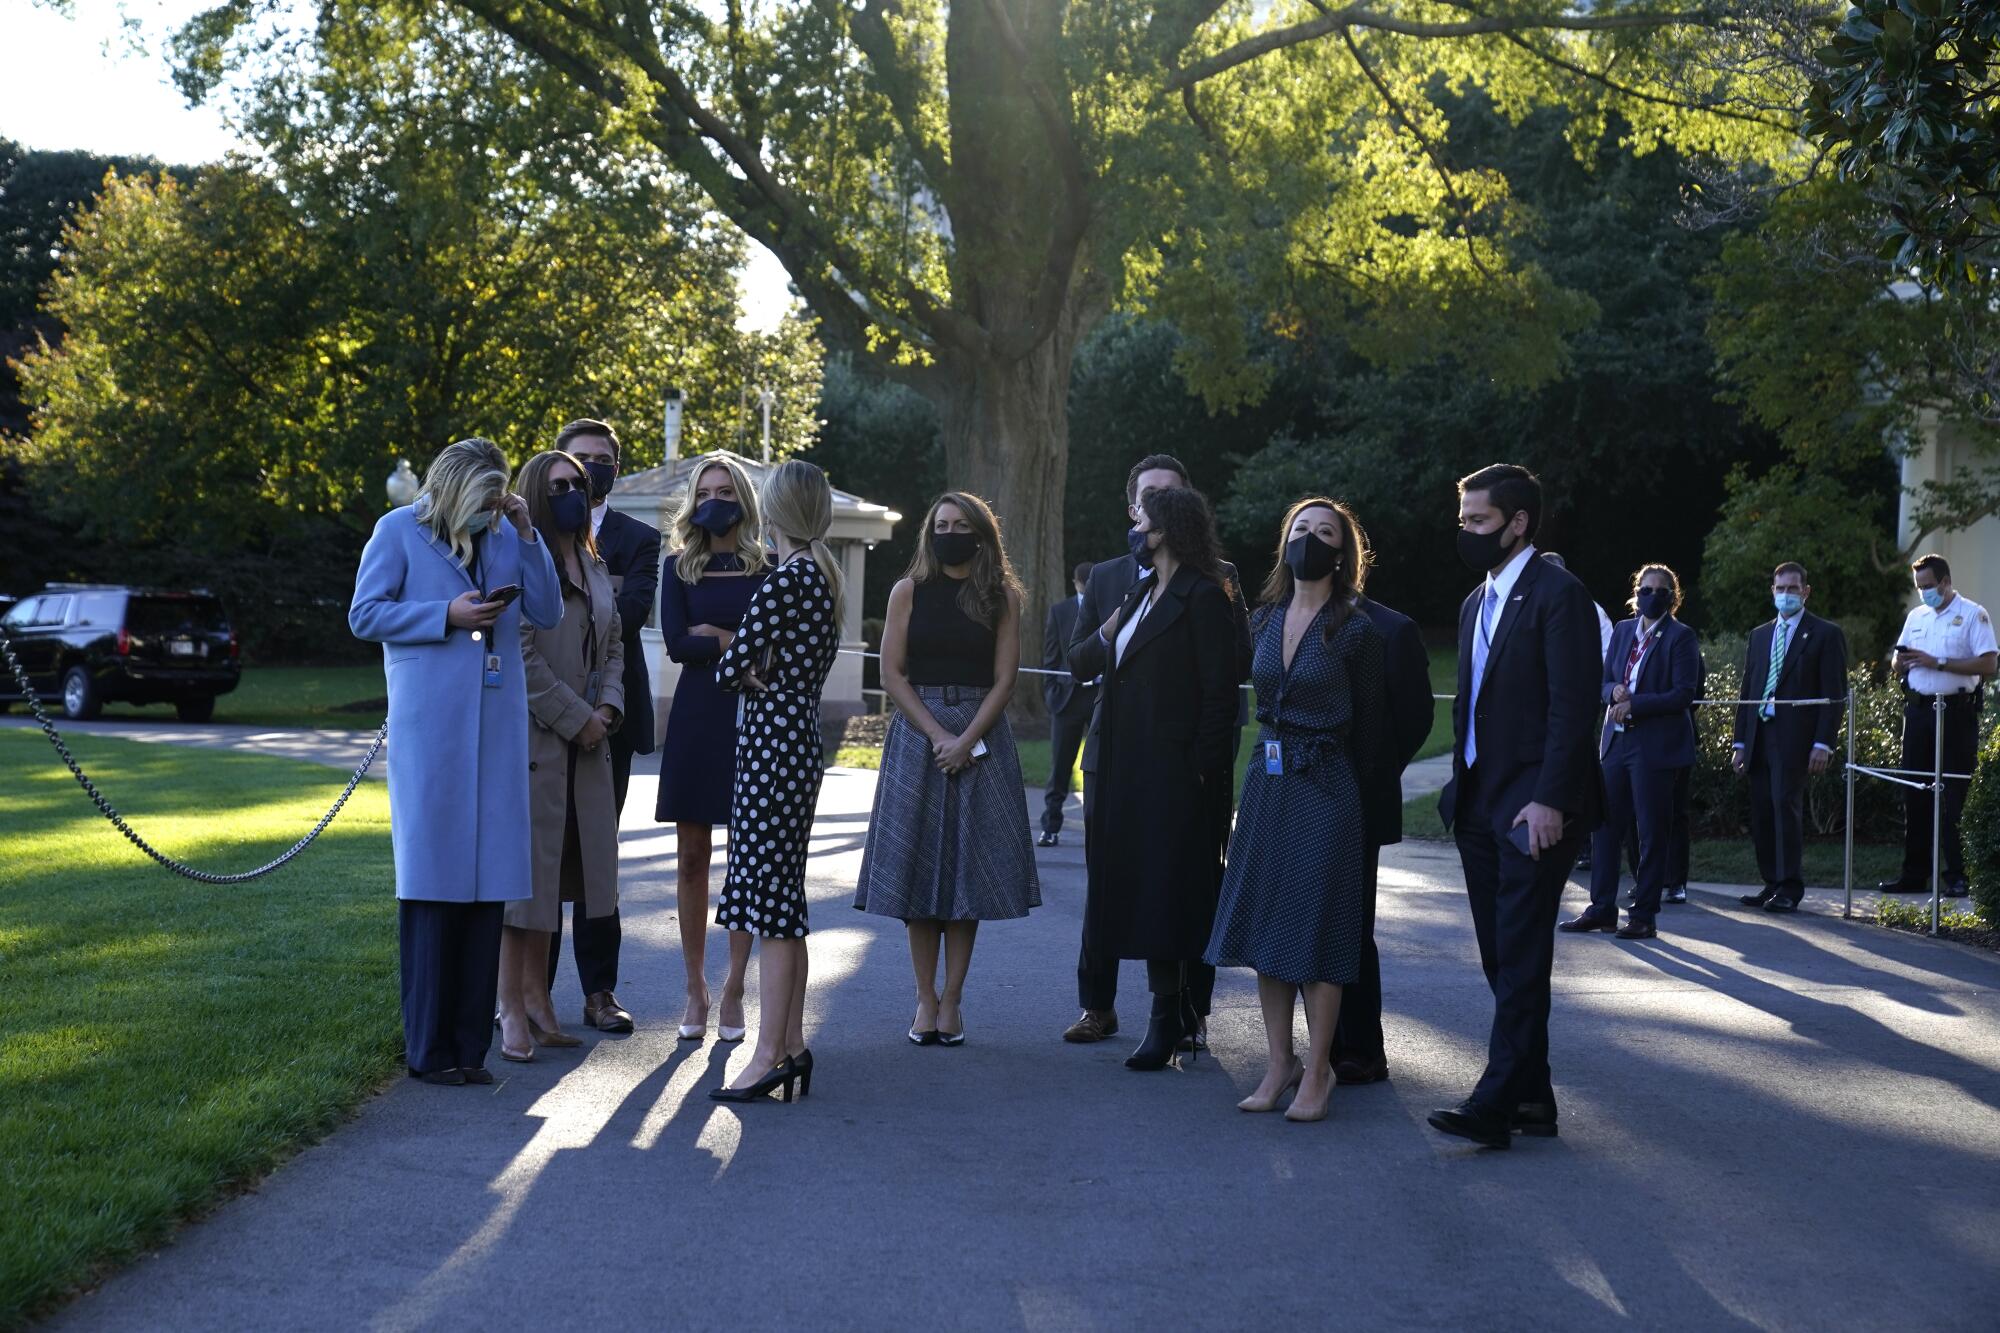 White House press secretary Kayleigh McEnany, fourth from left, waits with others.